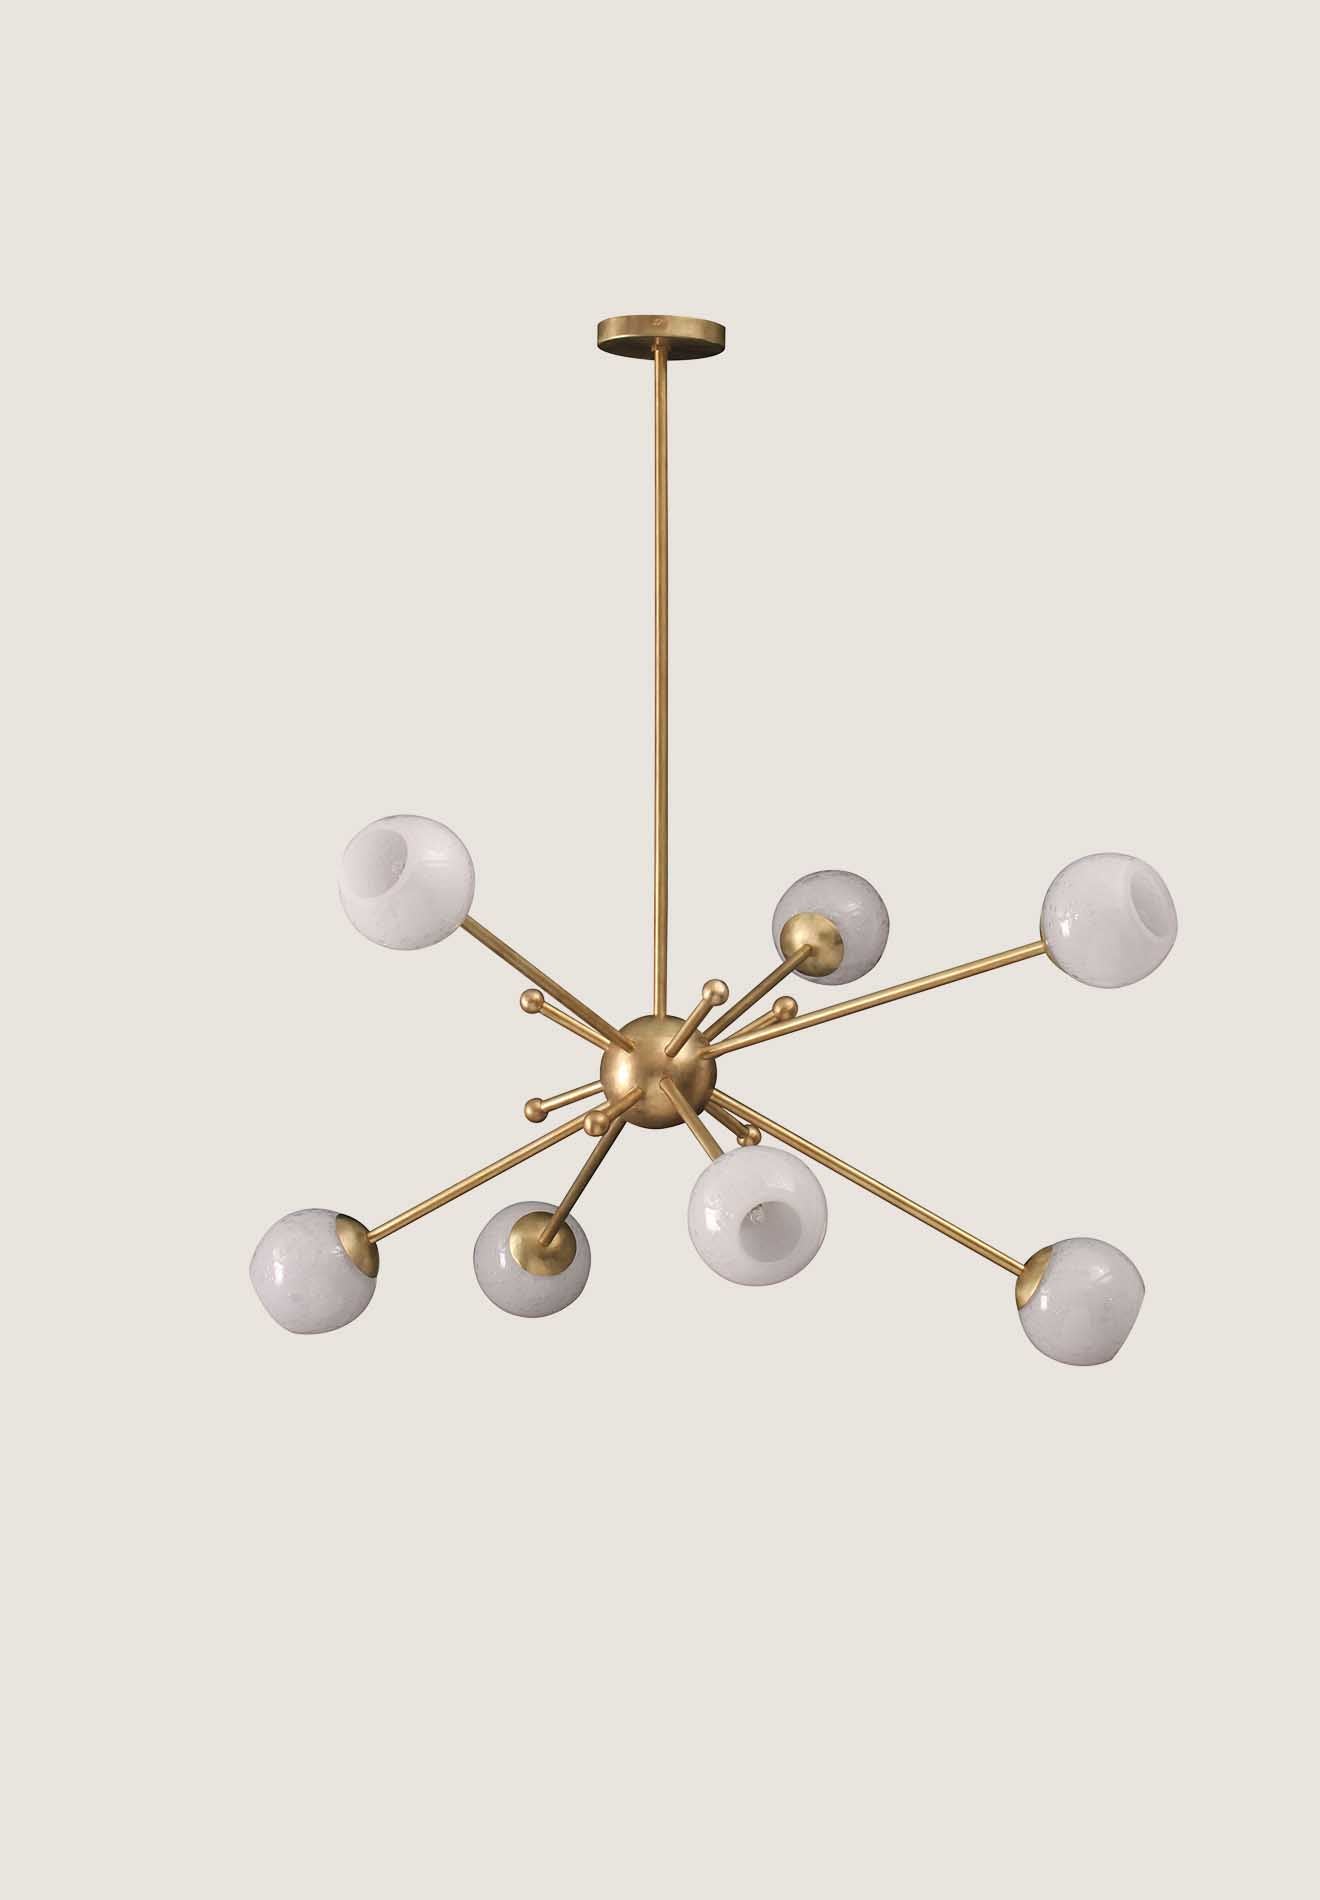 Shown in Bright Brass with Milk Glass